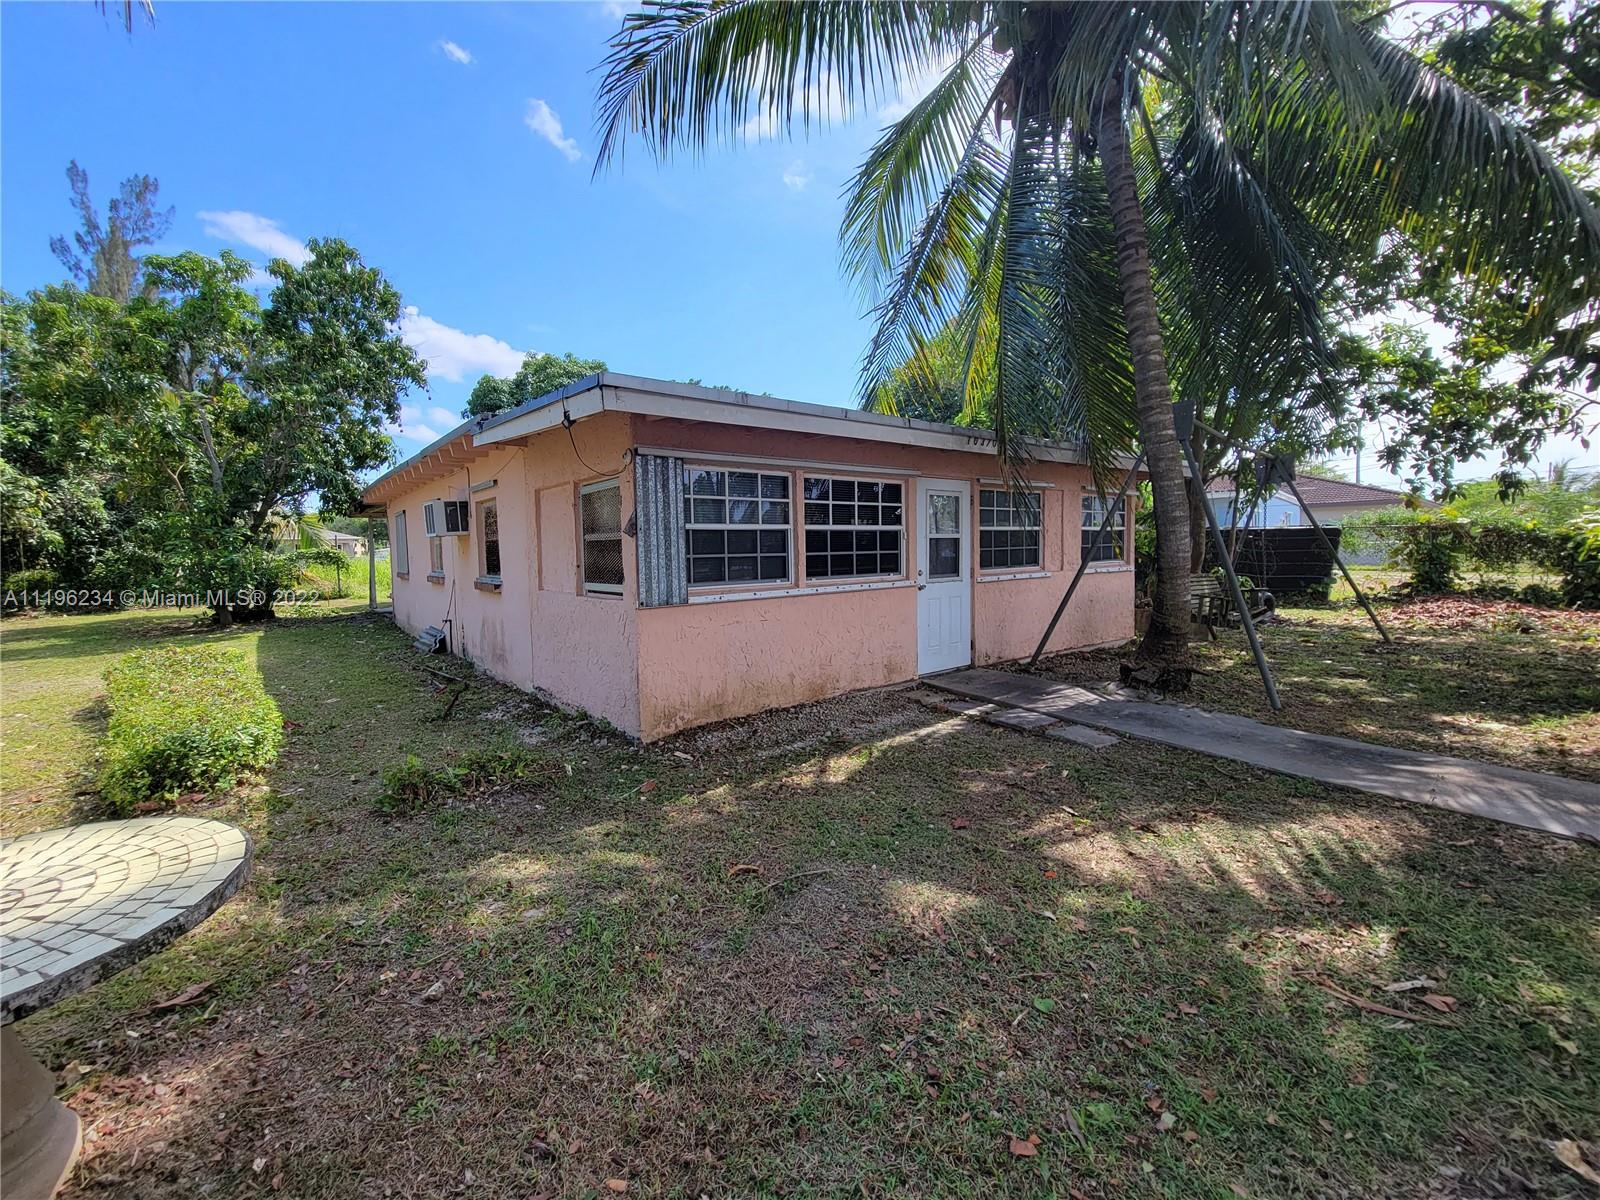 This concrete construction home has room for expansion! This 4/2 SFH is situated on an irregular, but expansive lot. Great for investors. Located in an opportunity zone. This property is a must see.